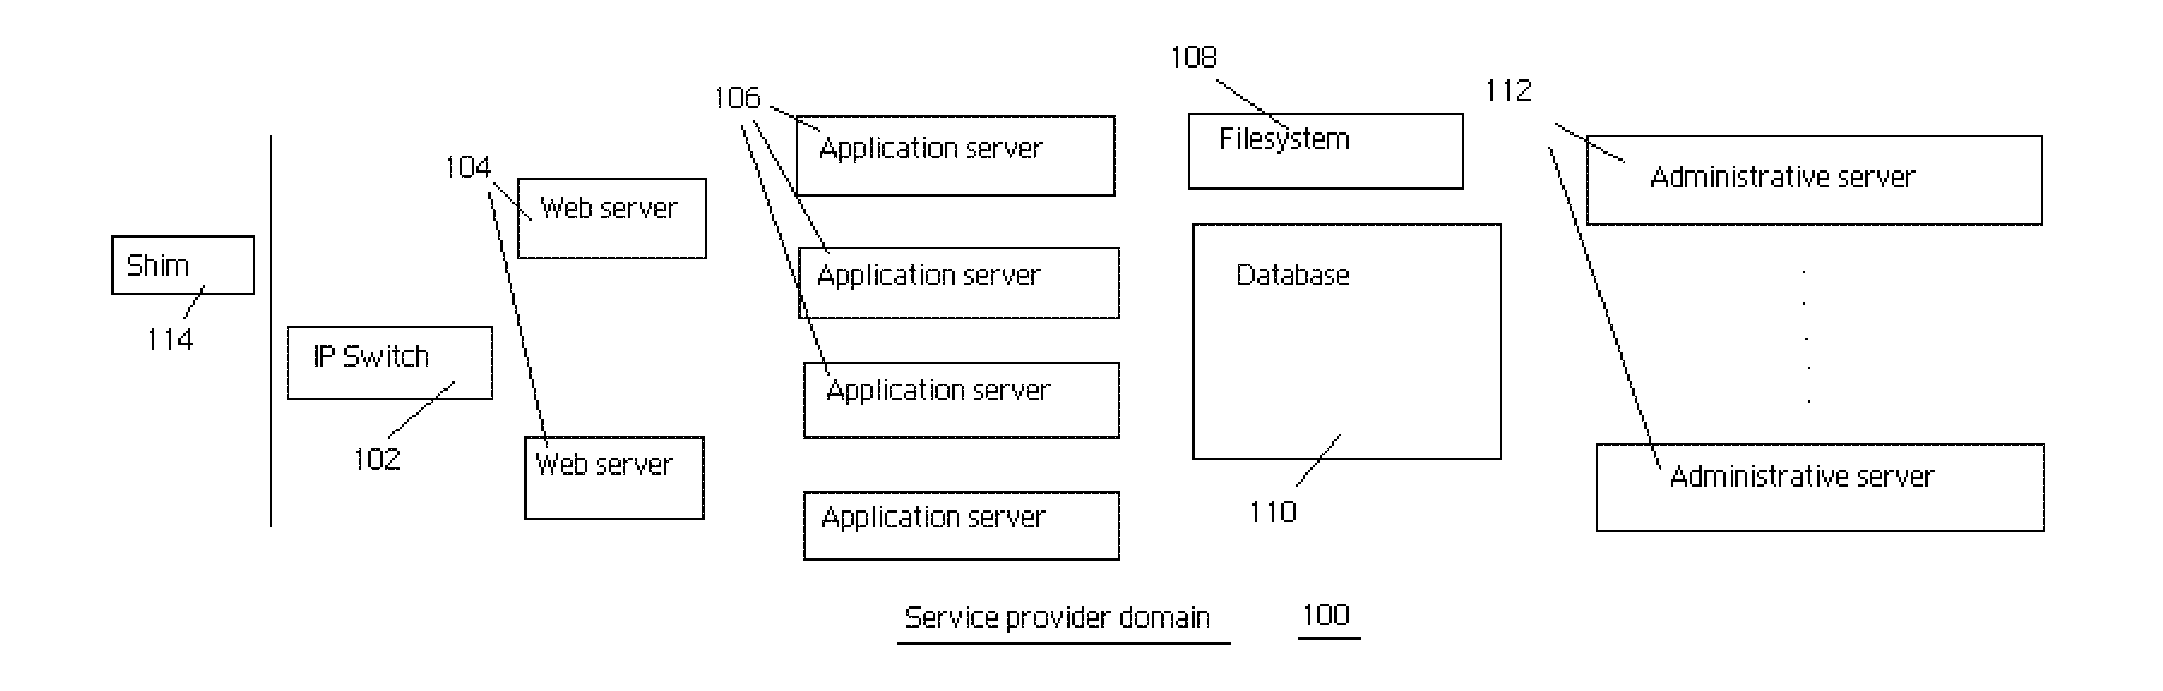 Method and system for online image security